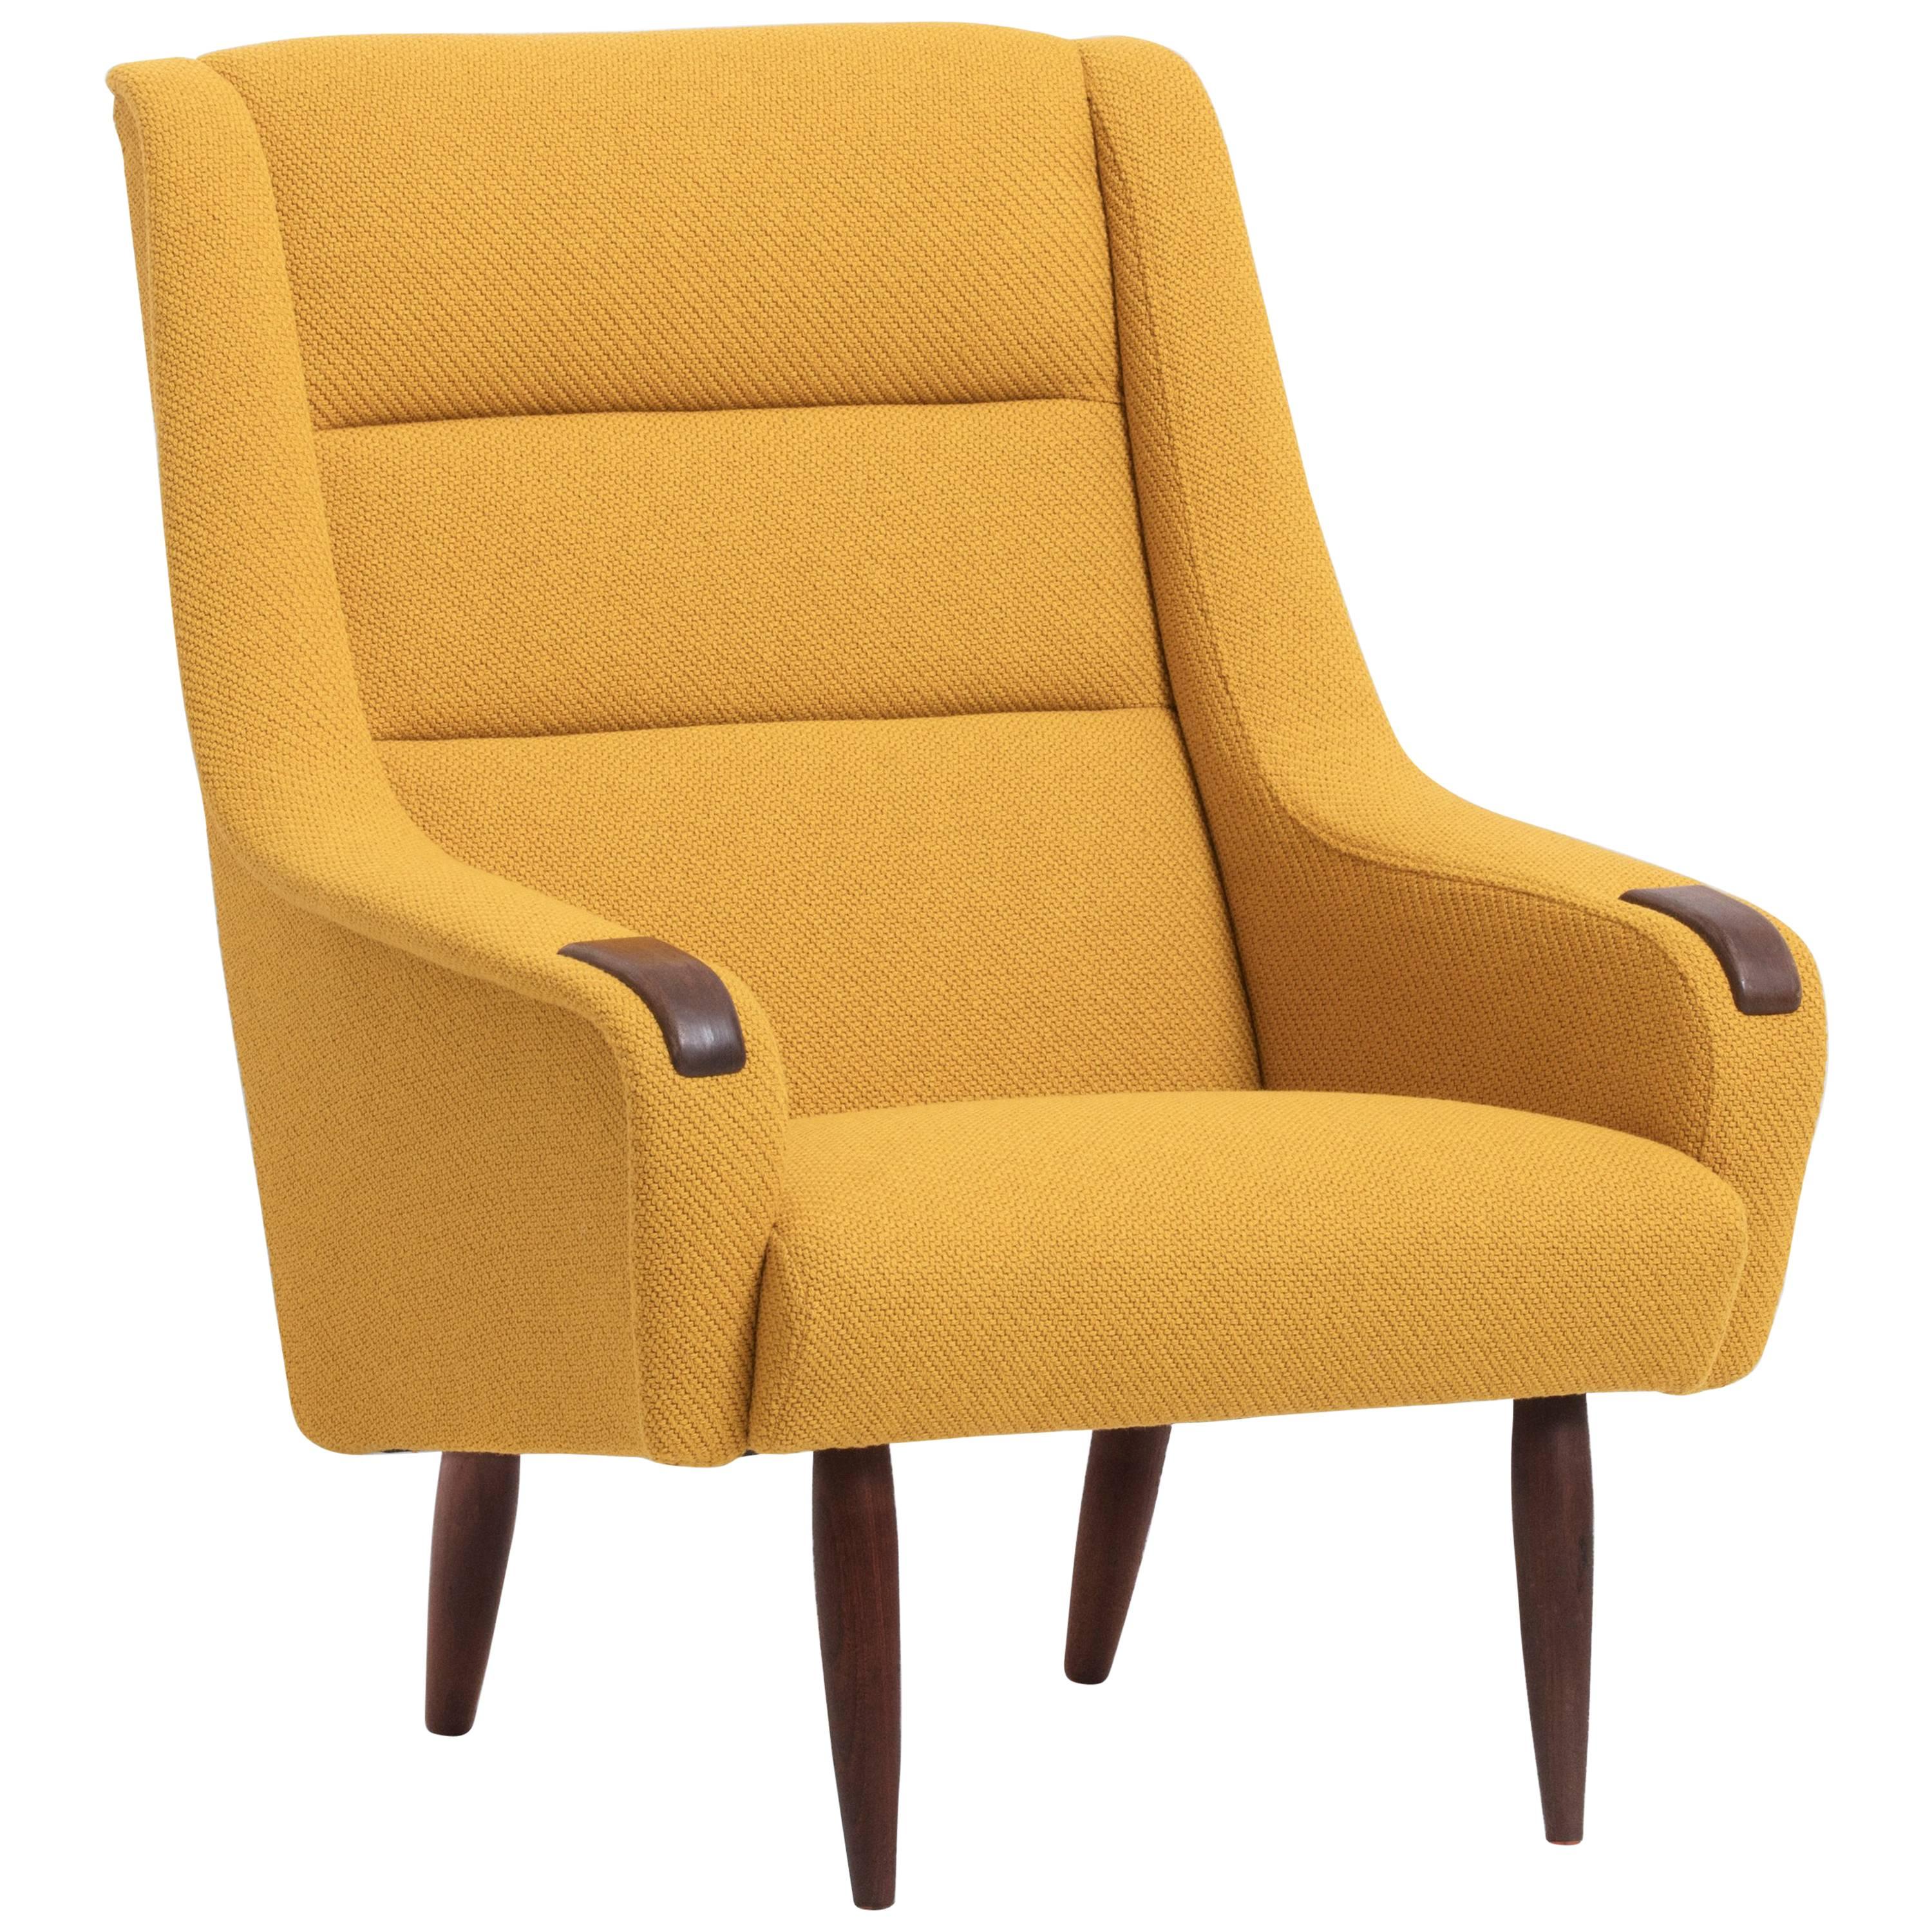 Danish Produced Lounge Chair, 1950s For Sale